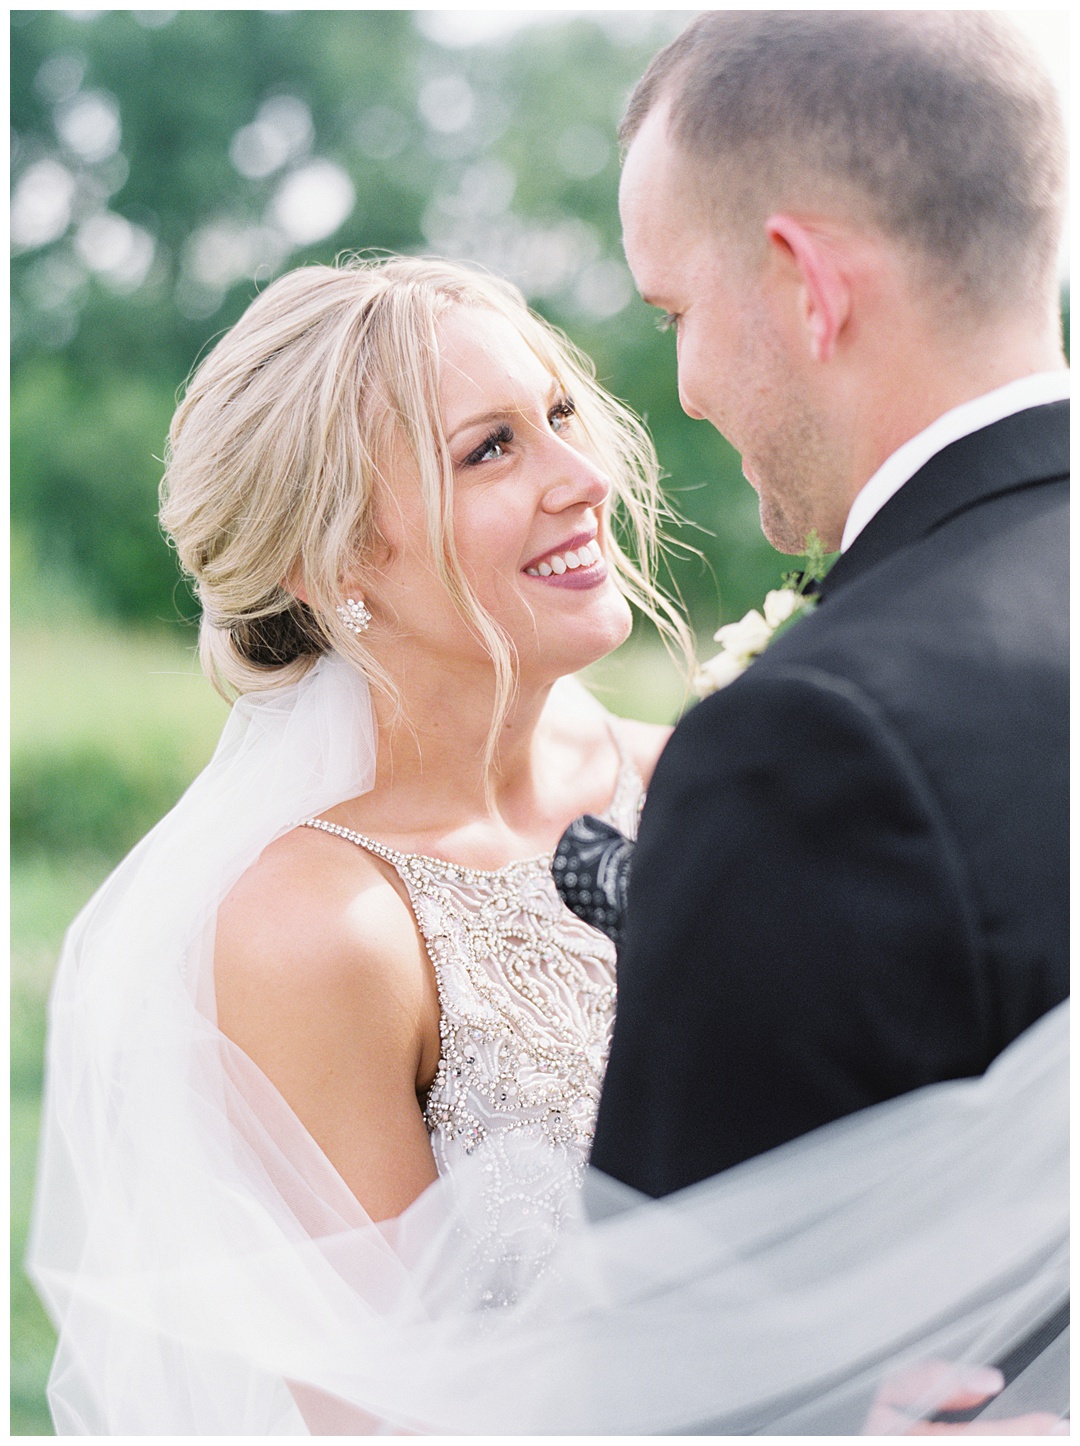 Bride and Groom Lush Backyard Wedding on Film Featured on Magnolia Rouge with Sarah Sunstrom Photography